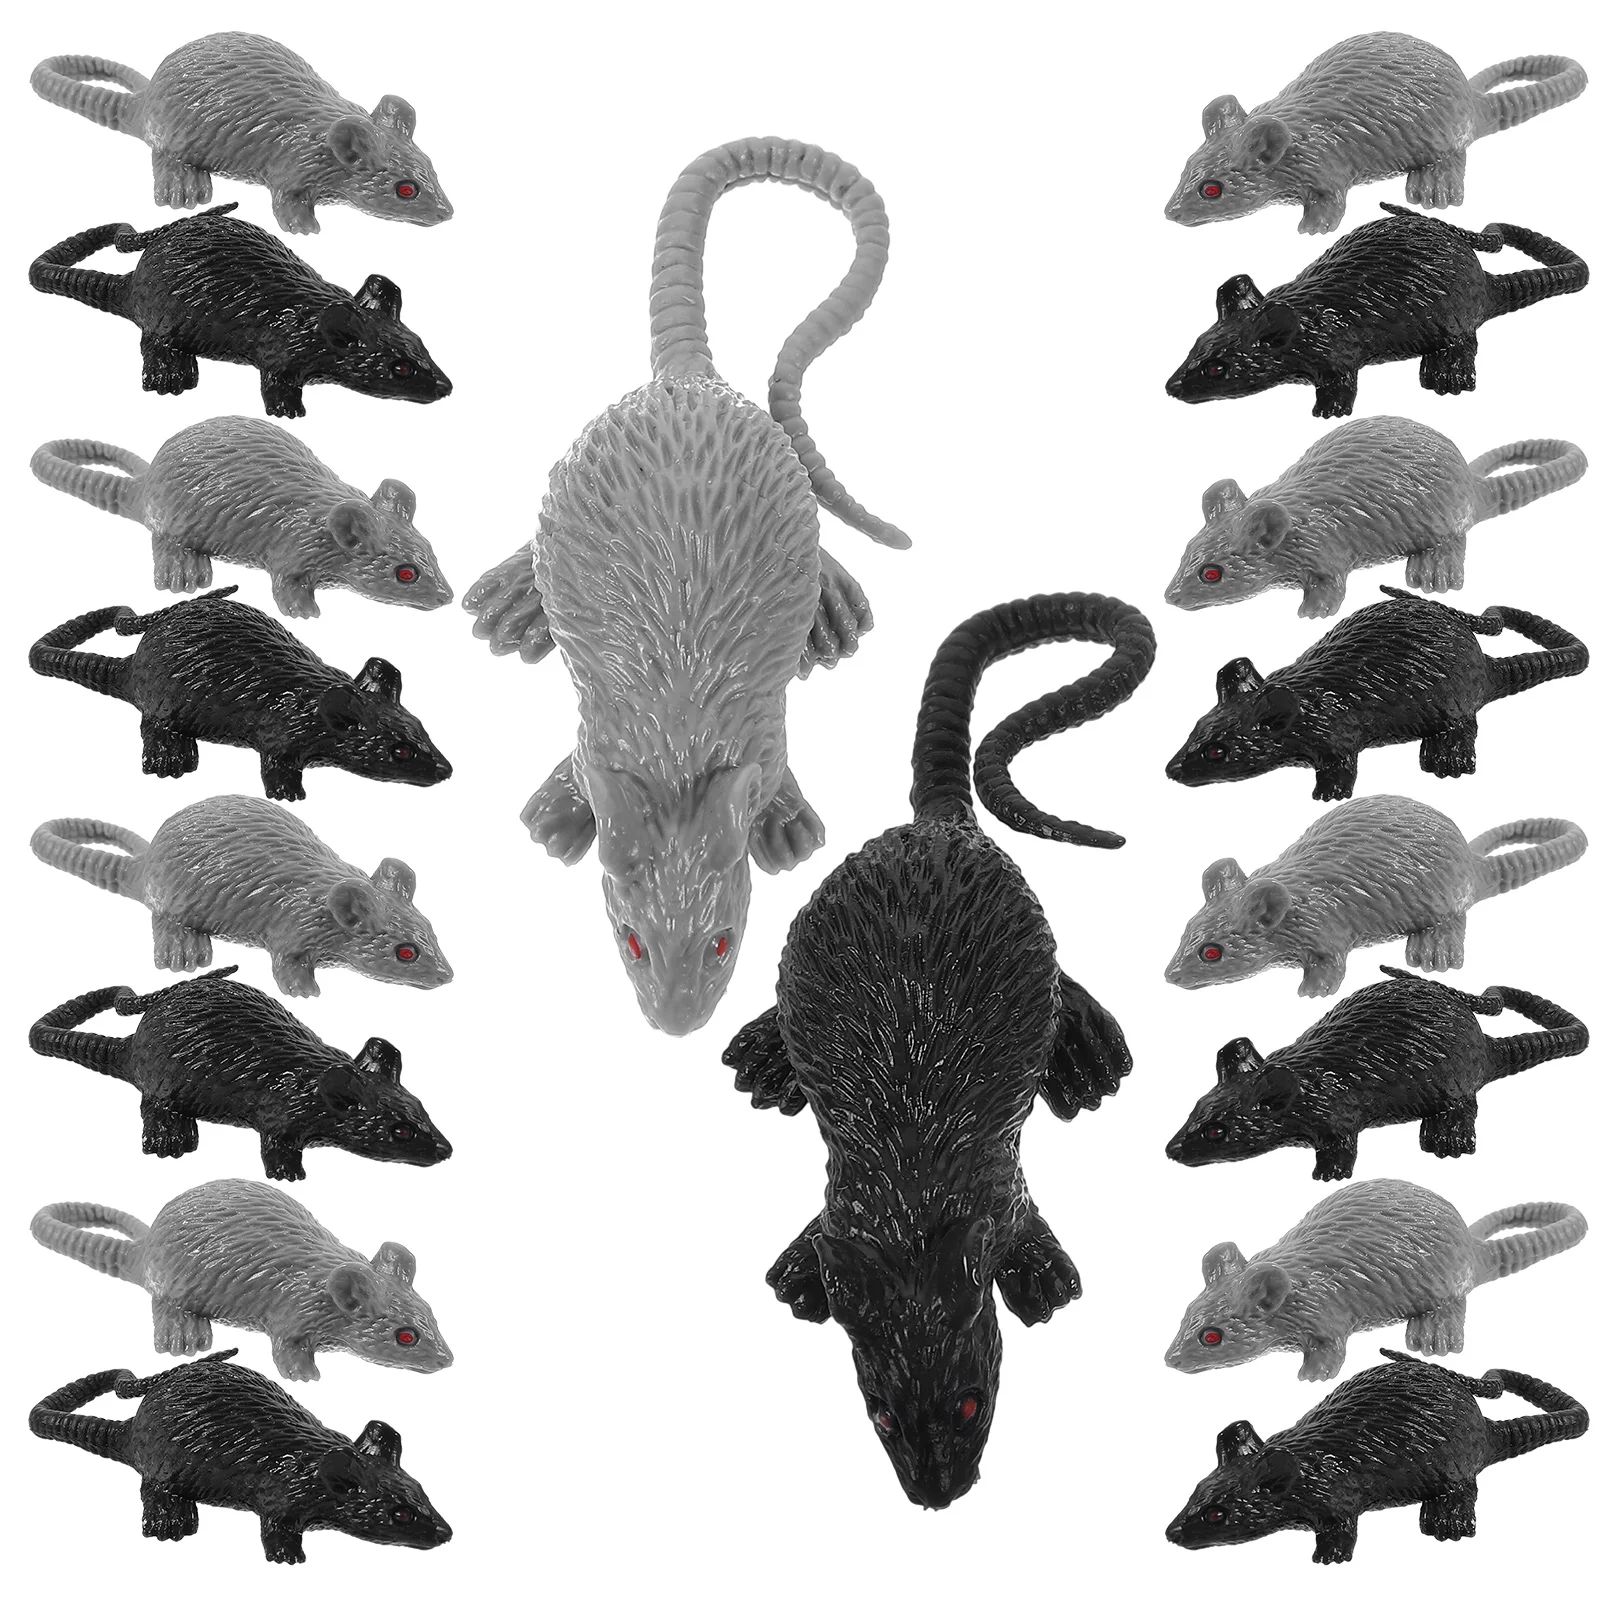 

20 PCS Halloween Scary Small Mouse Model Simulation Toy Artificial Party Gathering Tricky Prank Prop Toys